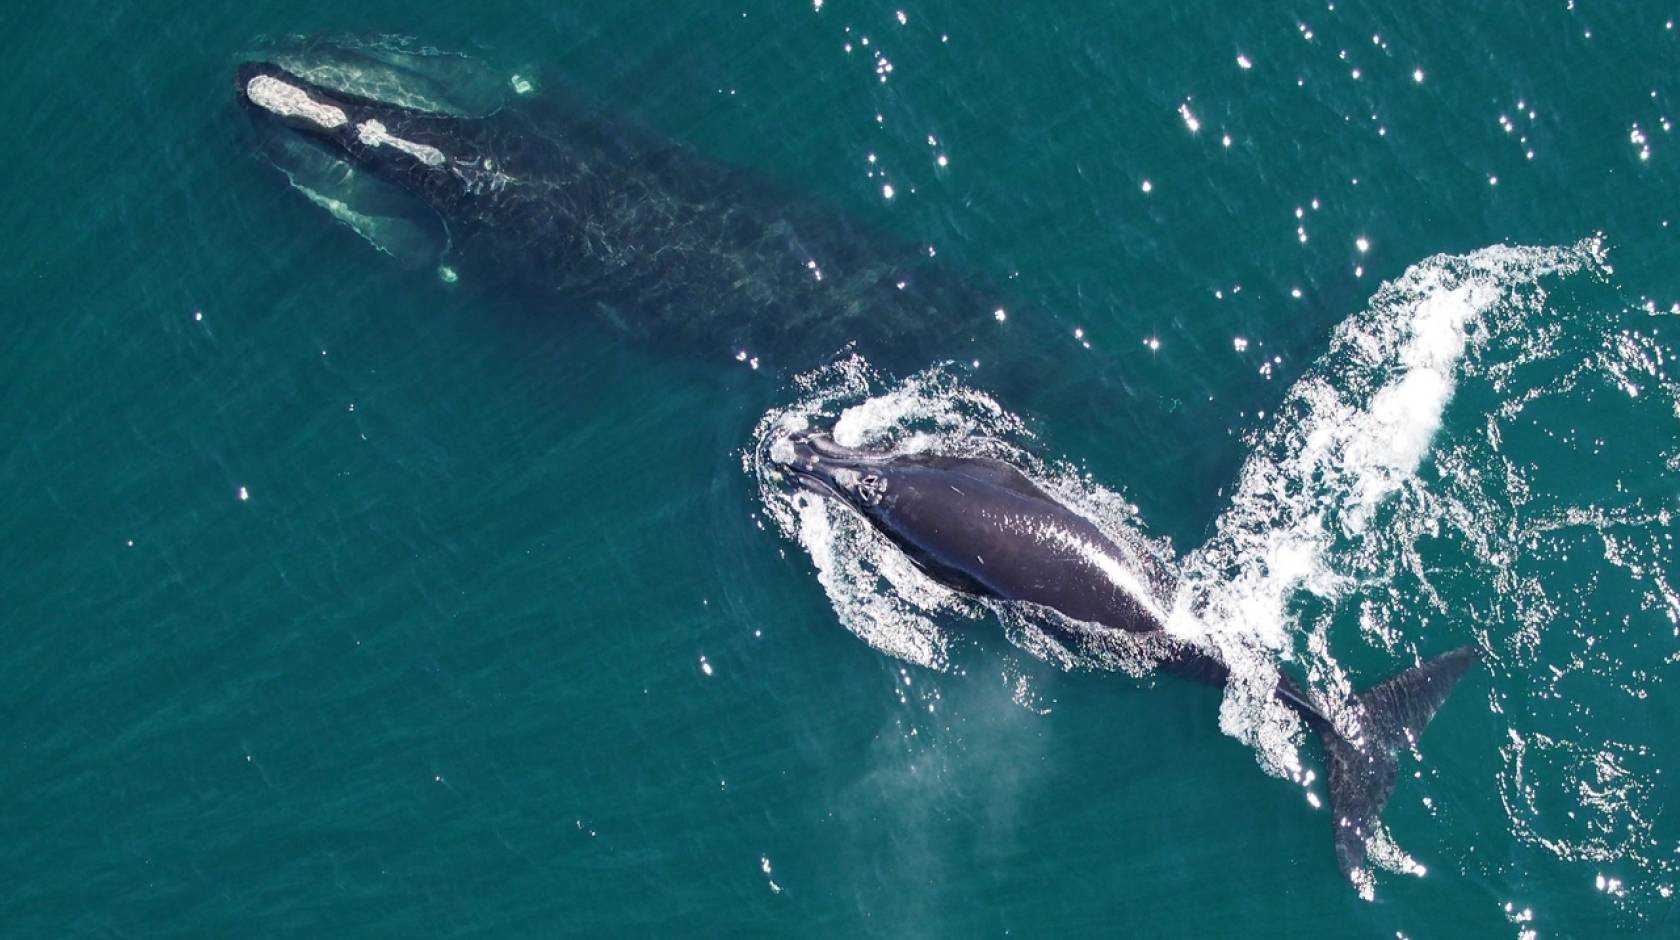 A North Atlantic right whale and her calf seen from a drone in the ocean